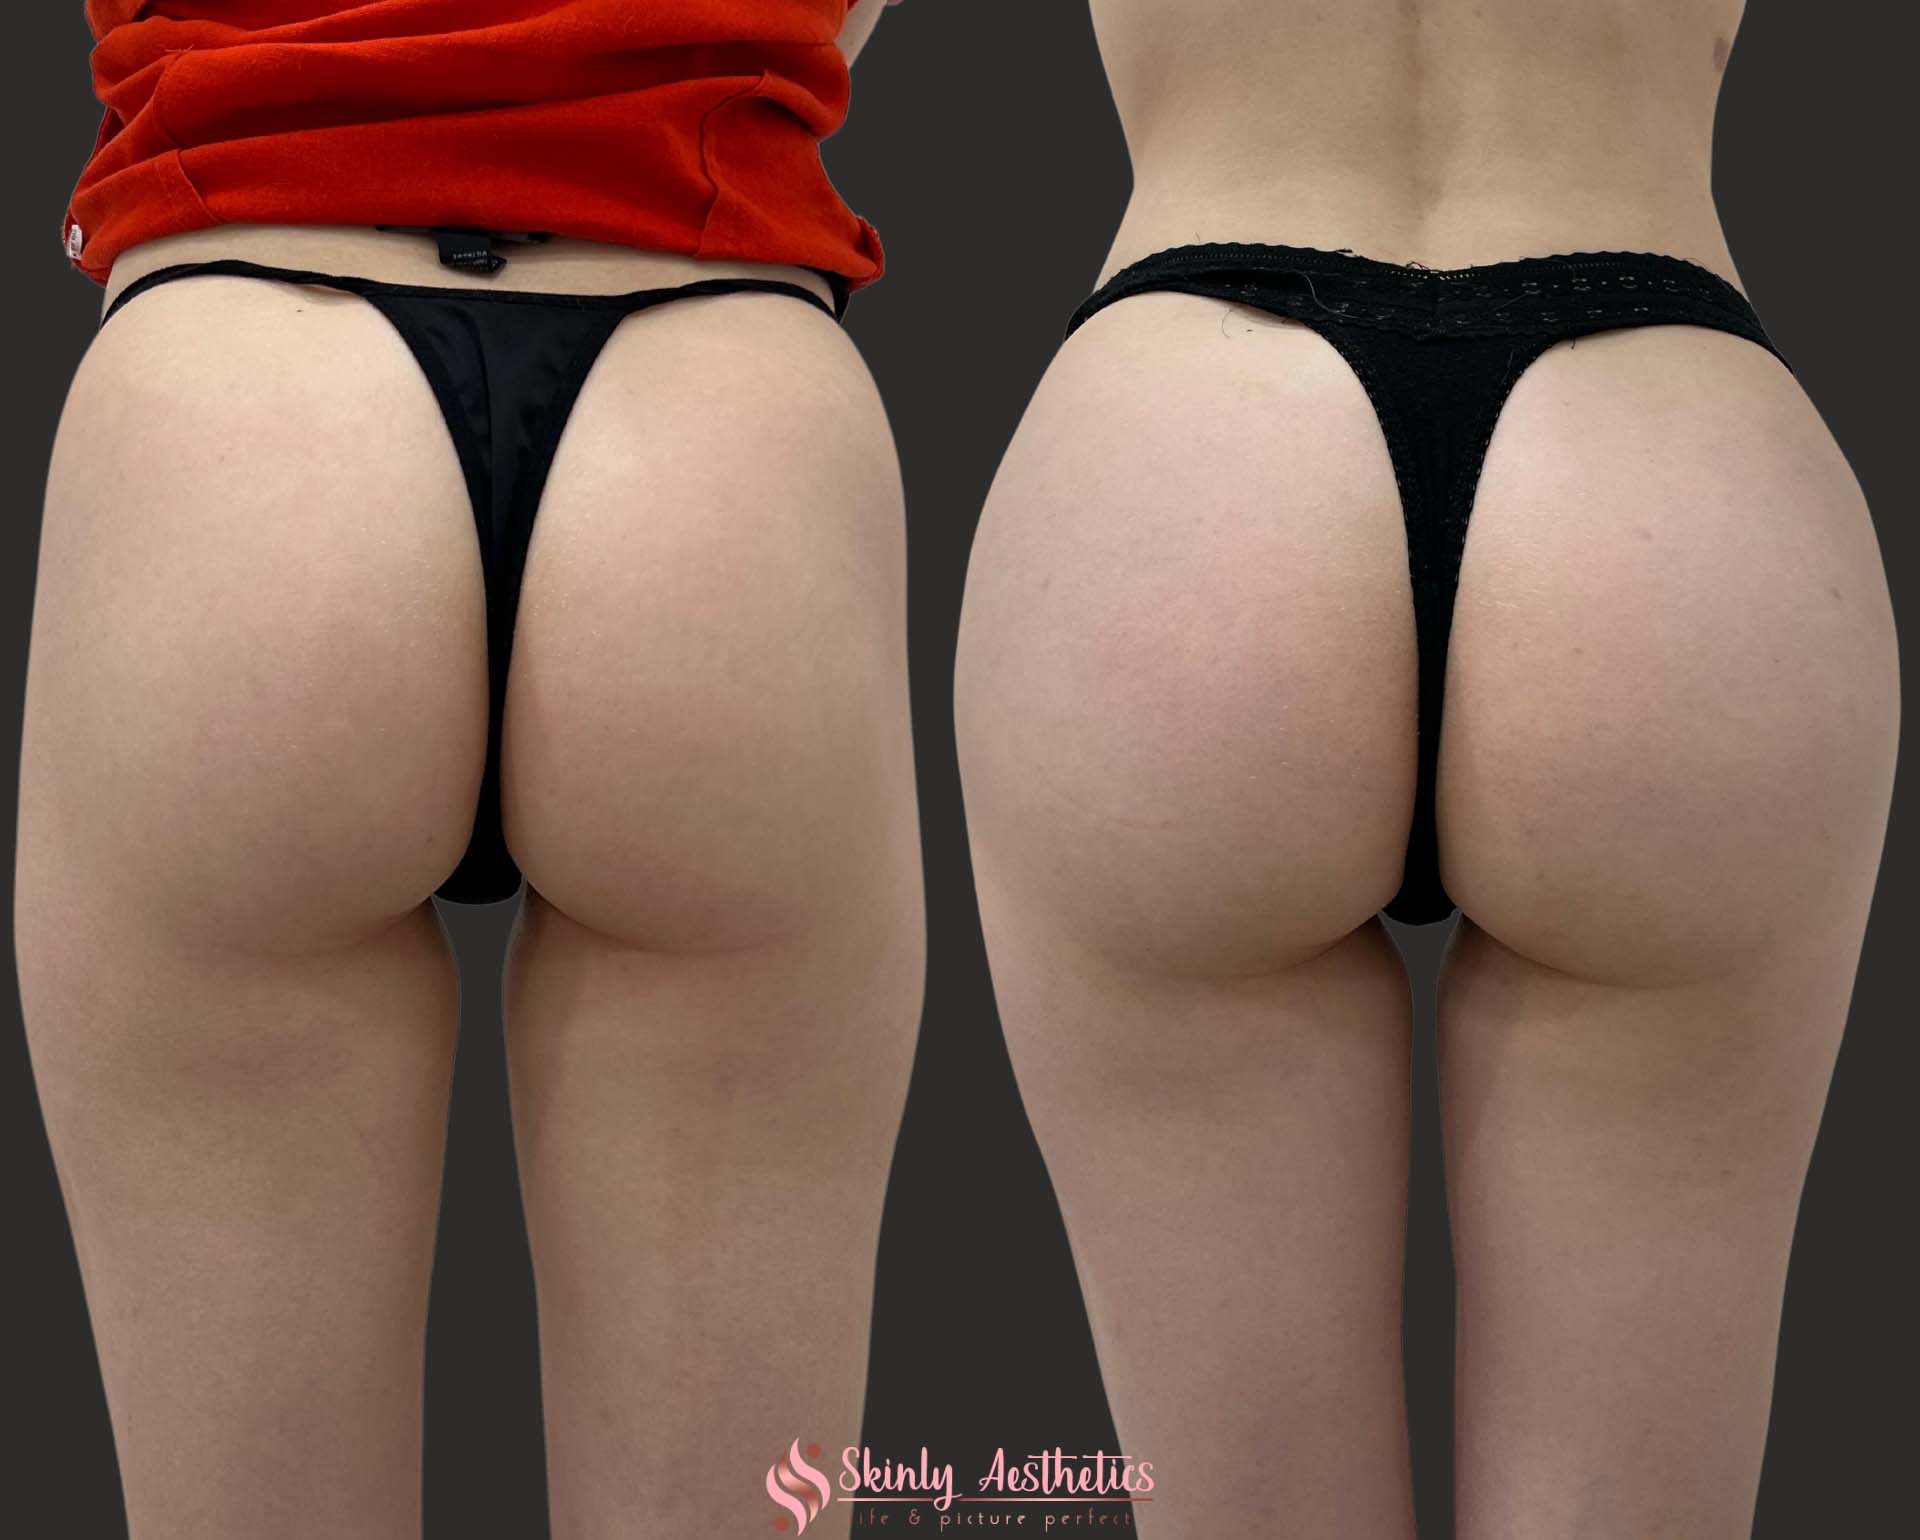 before and after results following multiple sessions of Sculptra injections for hip dips corrections